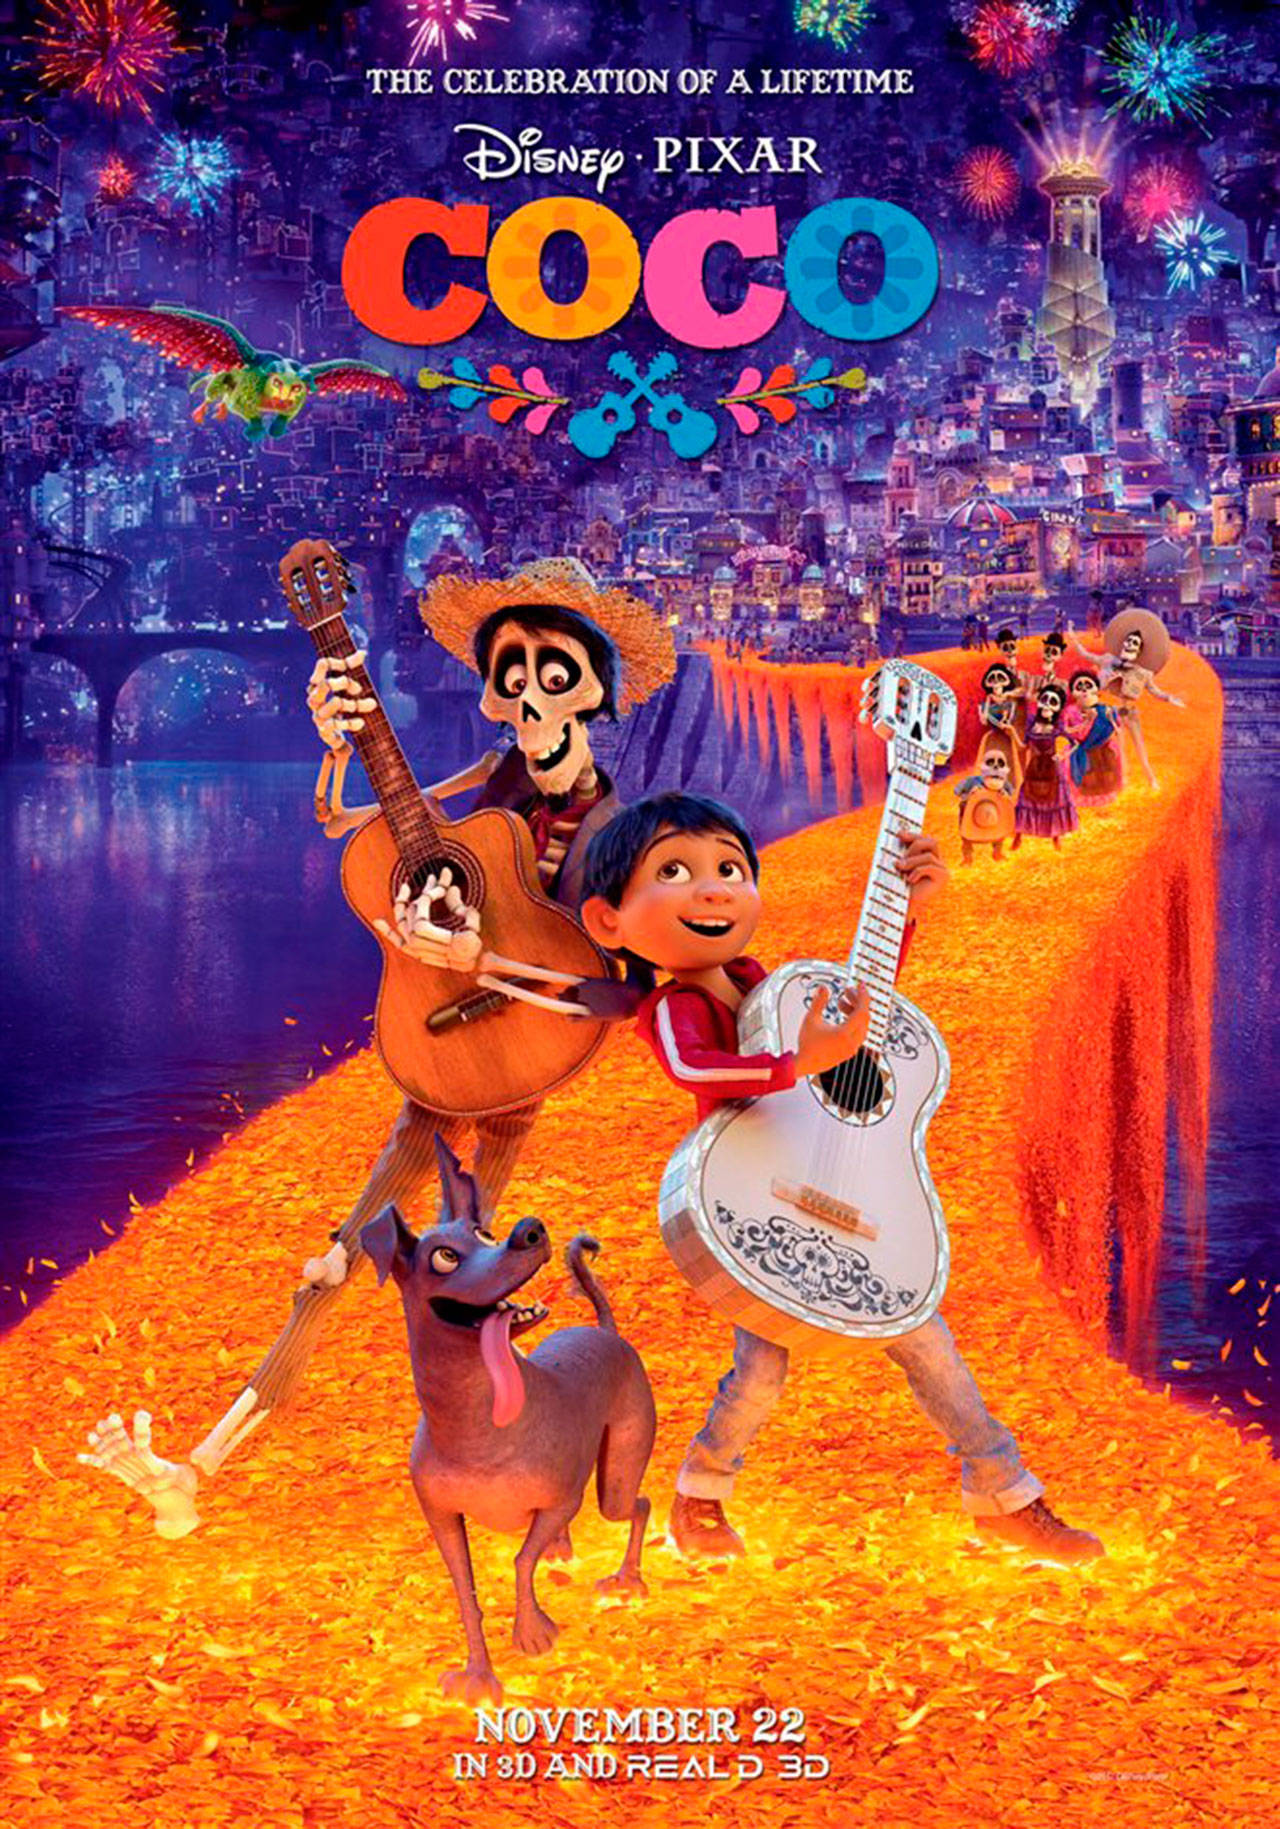 Image courtesy of Walt Disney Studios | “Coco” (2017) is the first slated film to be screened at Battle Point Park as part of the returning summer film screening program Movies in the Park on Friday, Aug. 17.